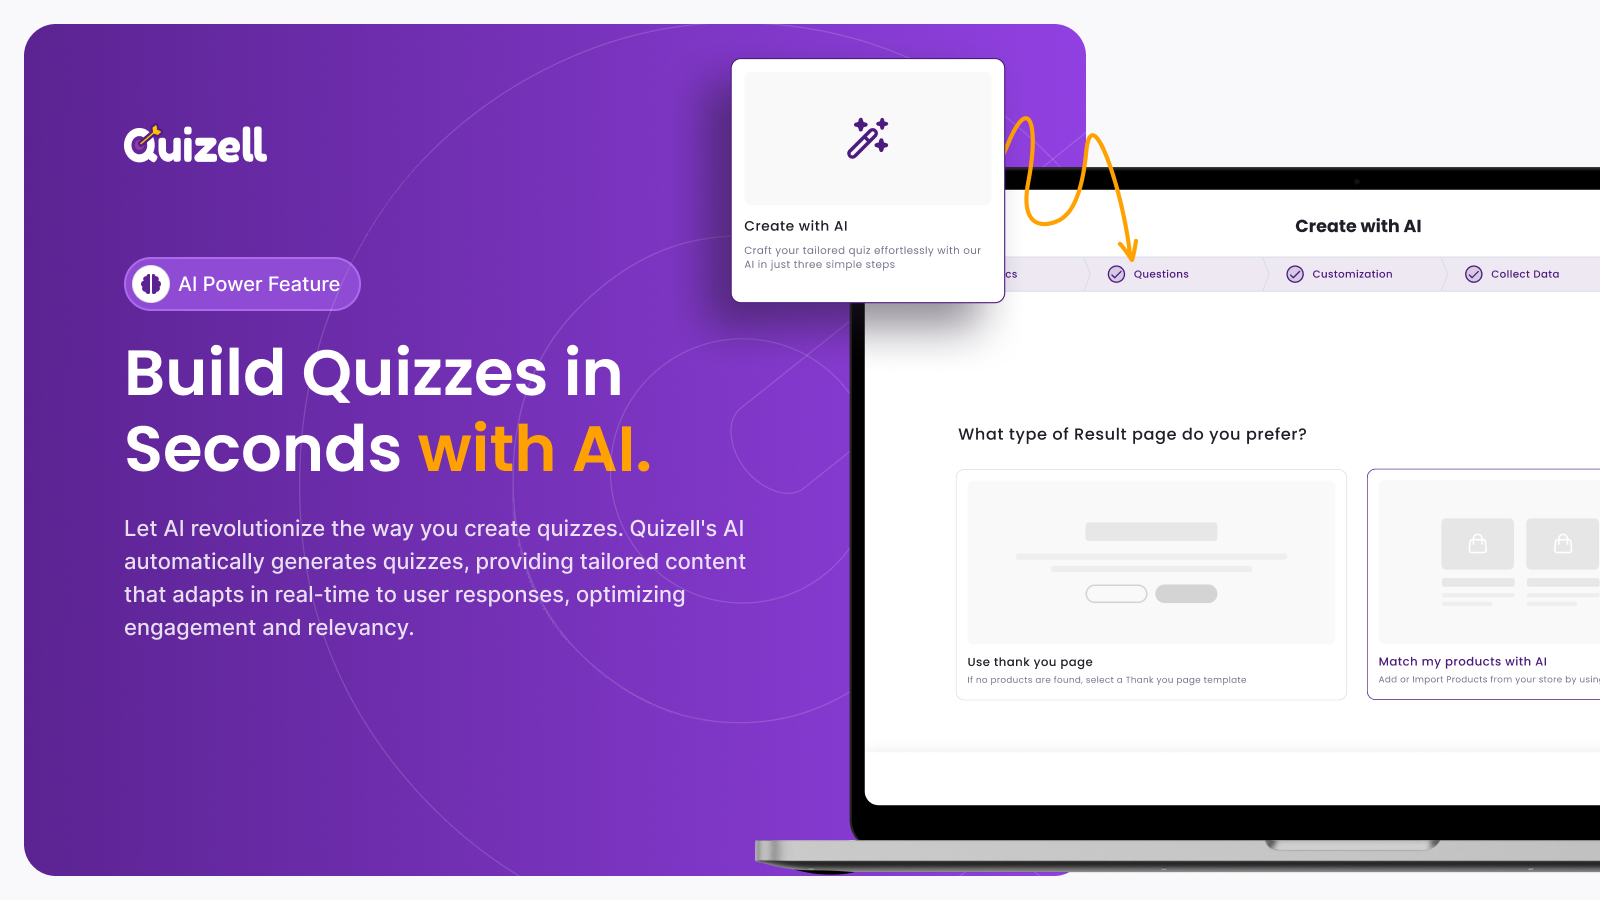 Build Quizzes in Seconds with AI.